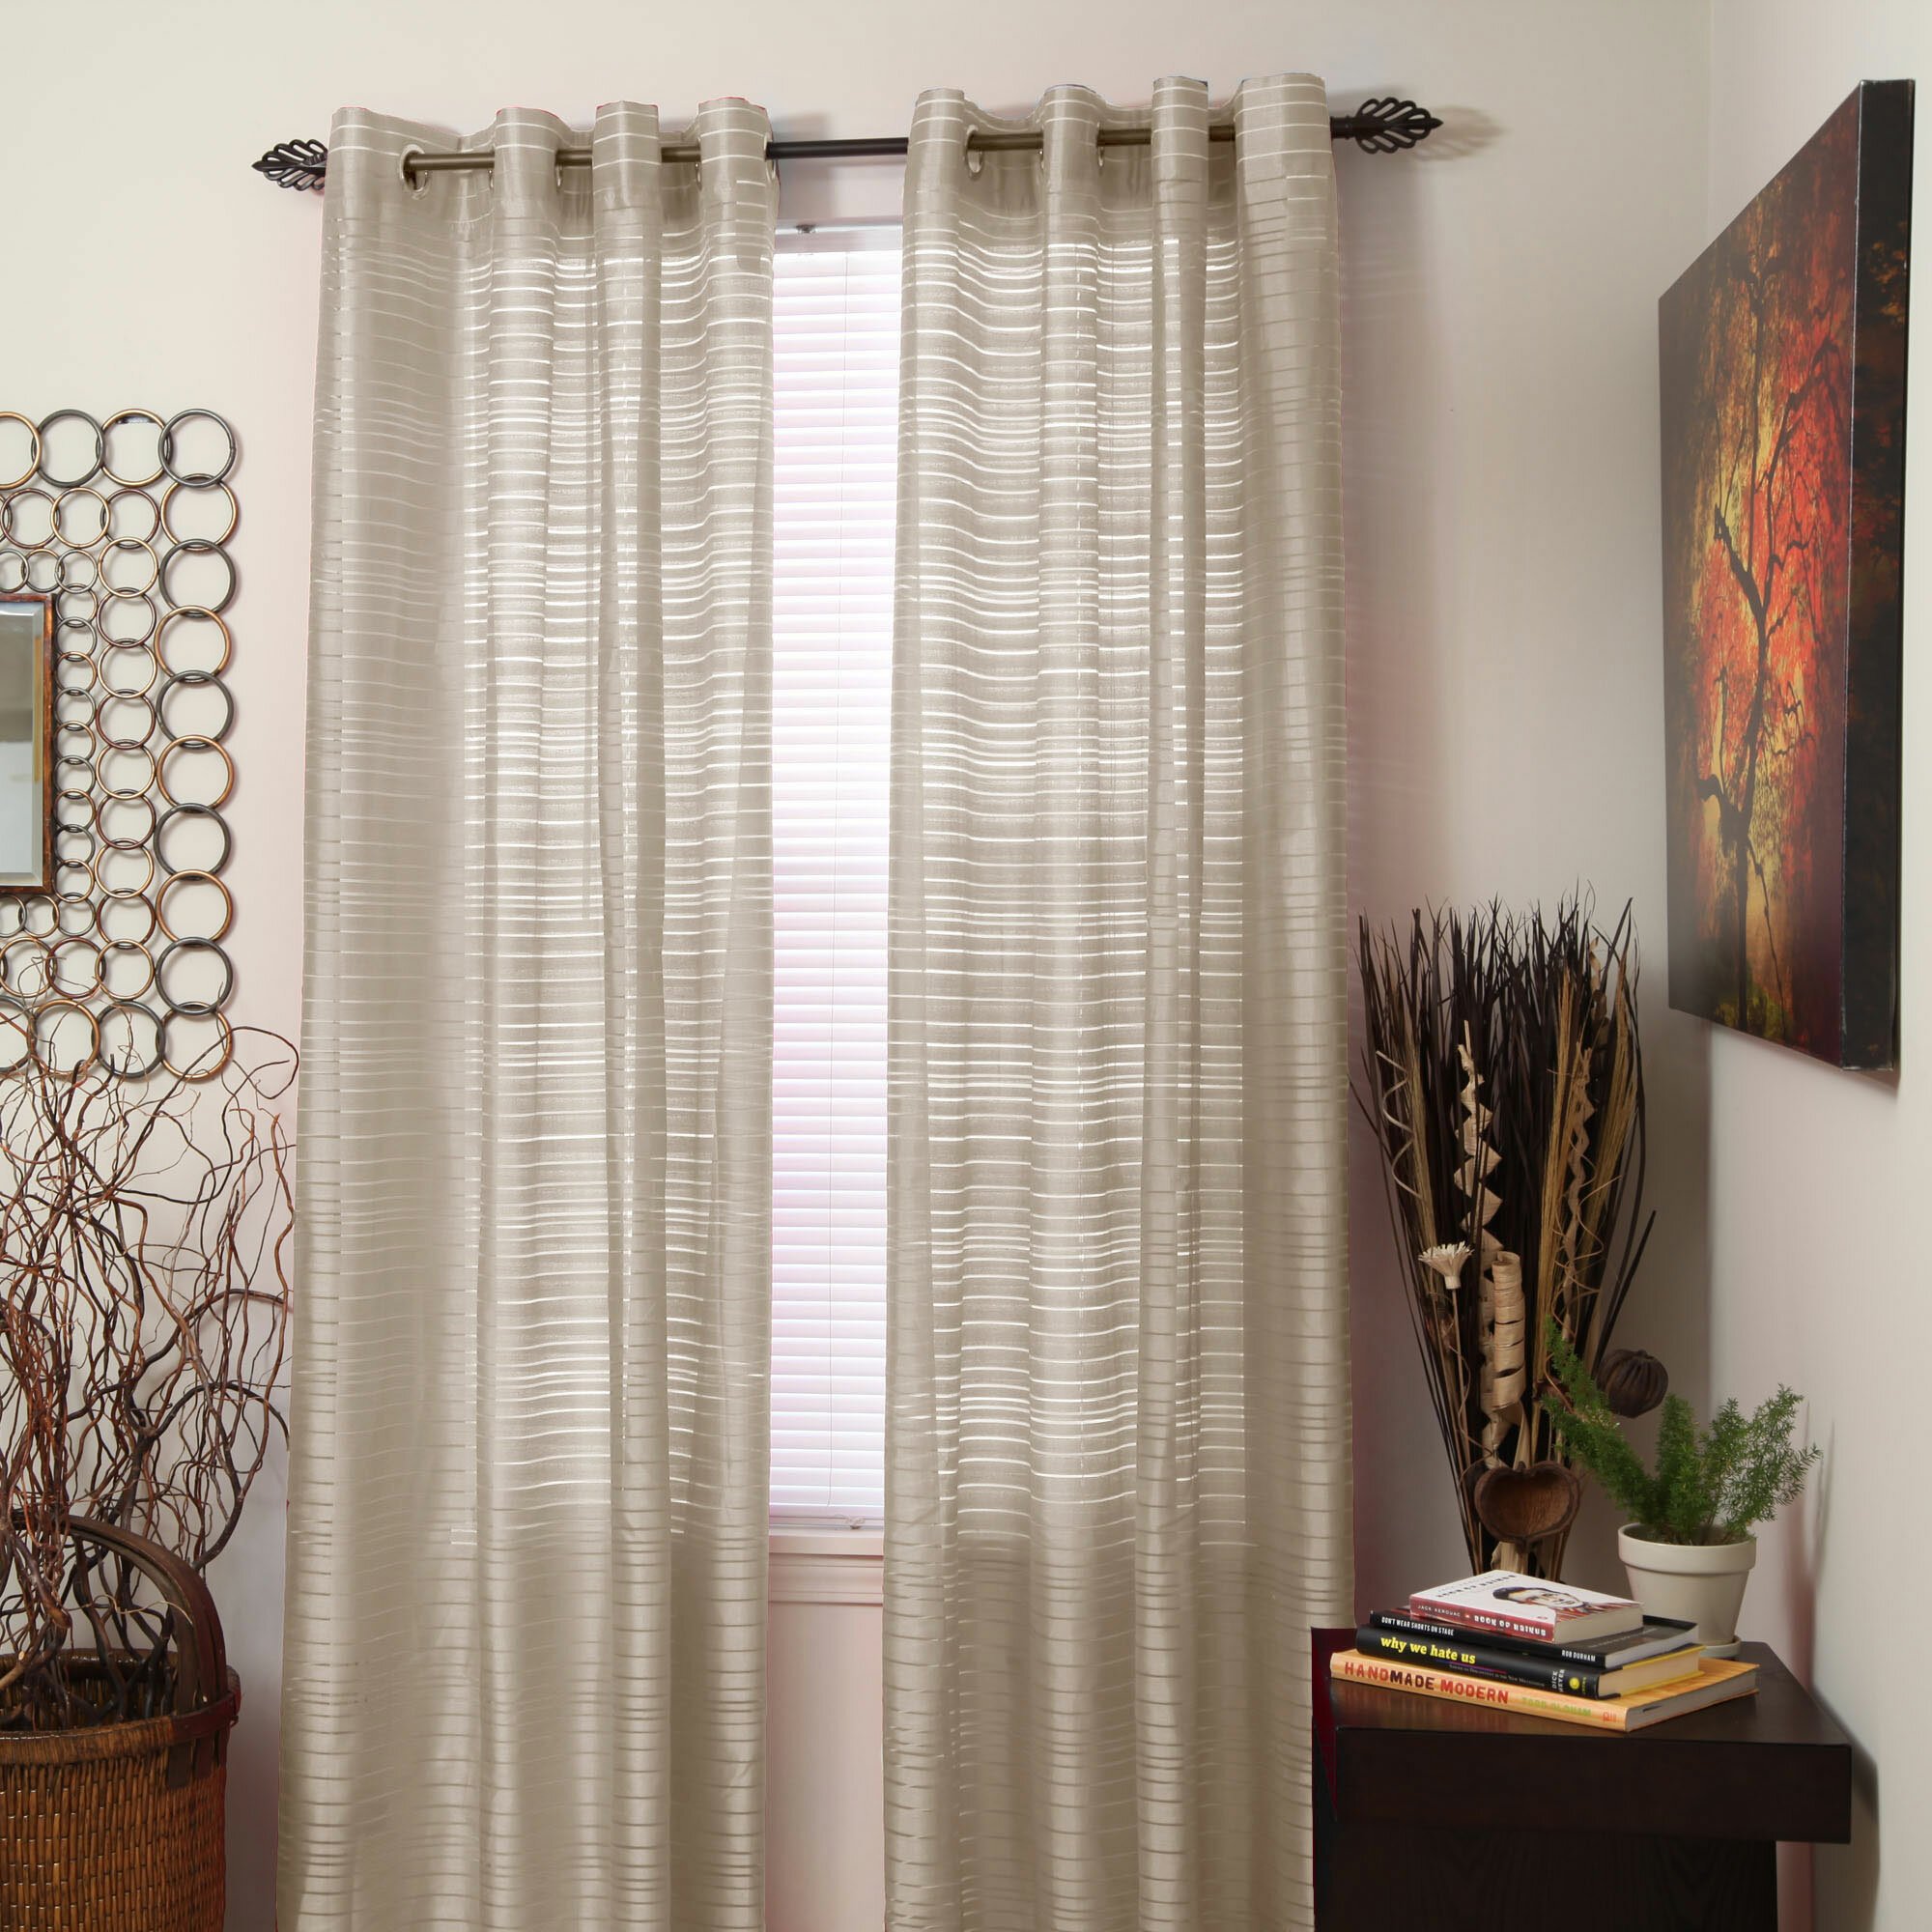 Hang Grommet Curtains With Sheers, Can You Hang Grommet Curtains With Rings